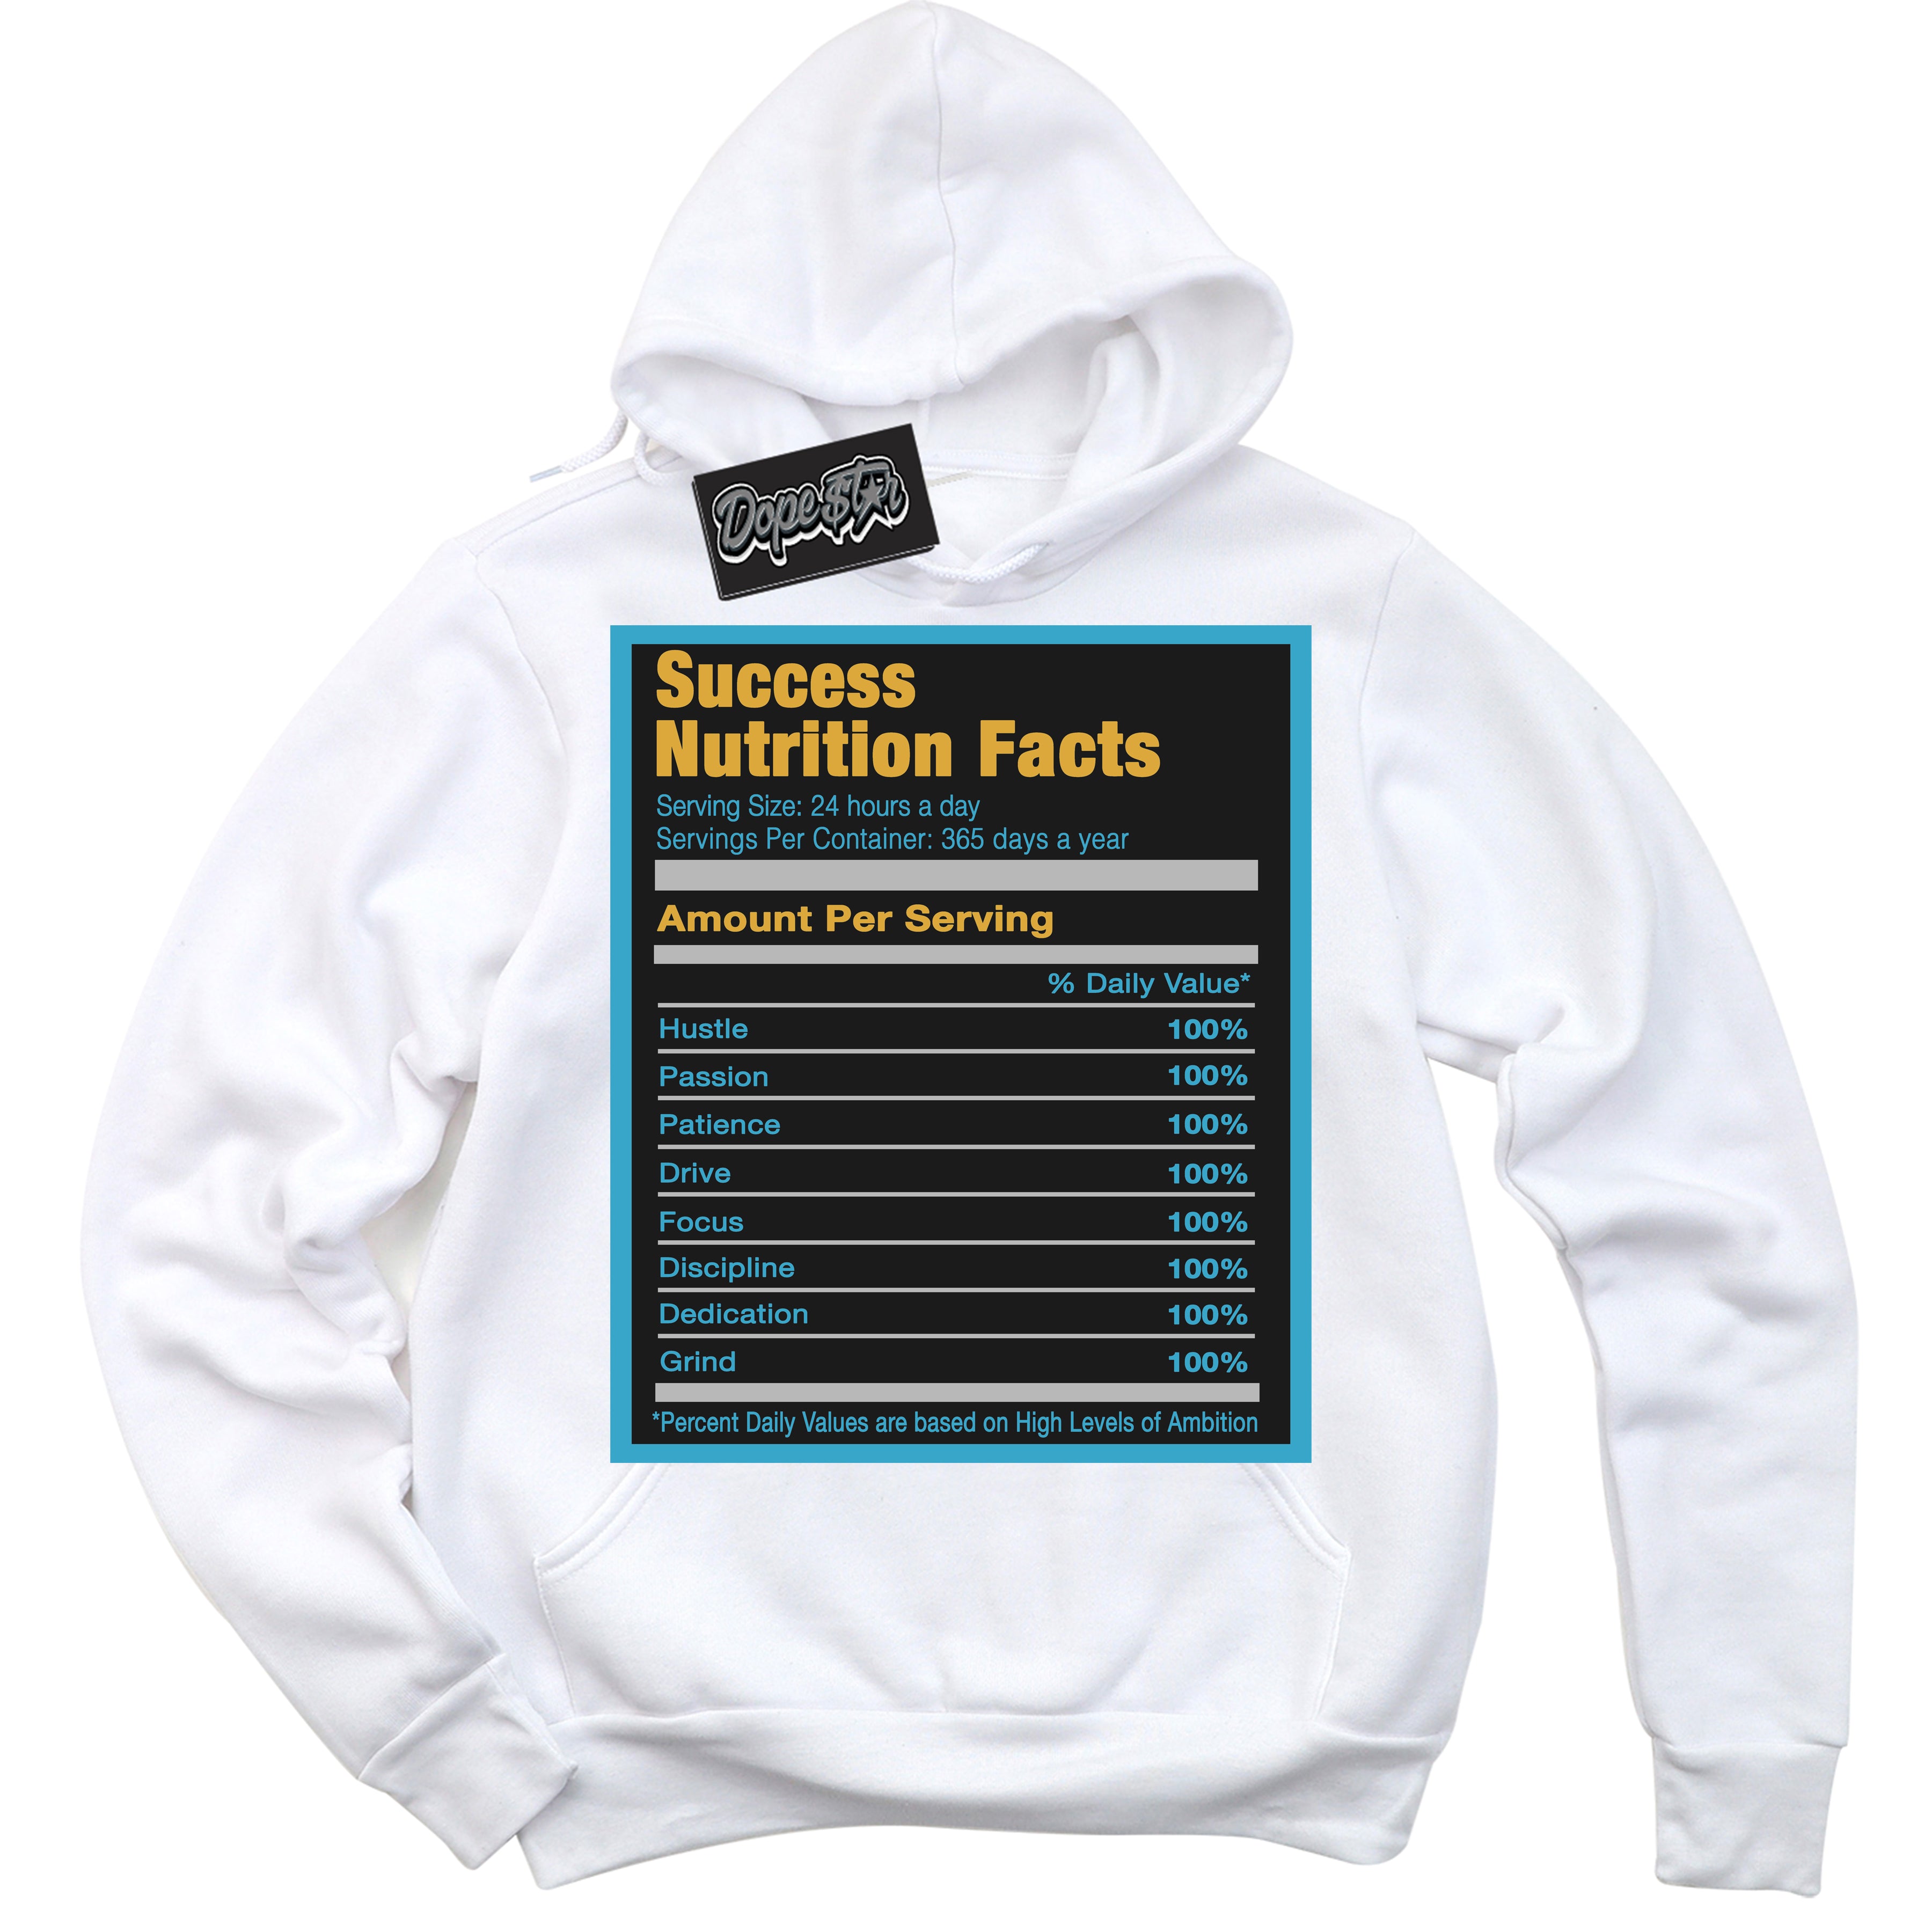 Cool White Hoodie with “ Success Nutrition ”  design that Perfectly Matches Aqua 5s Sneakers.